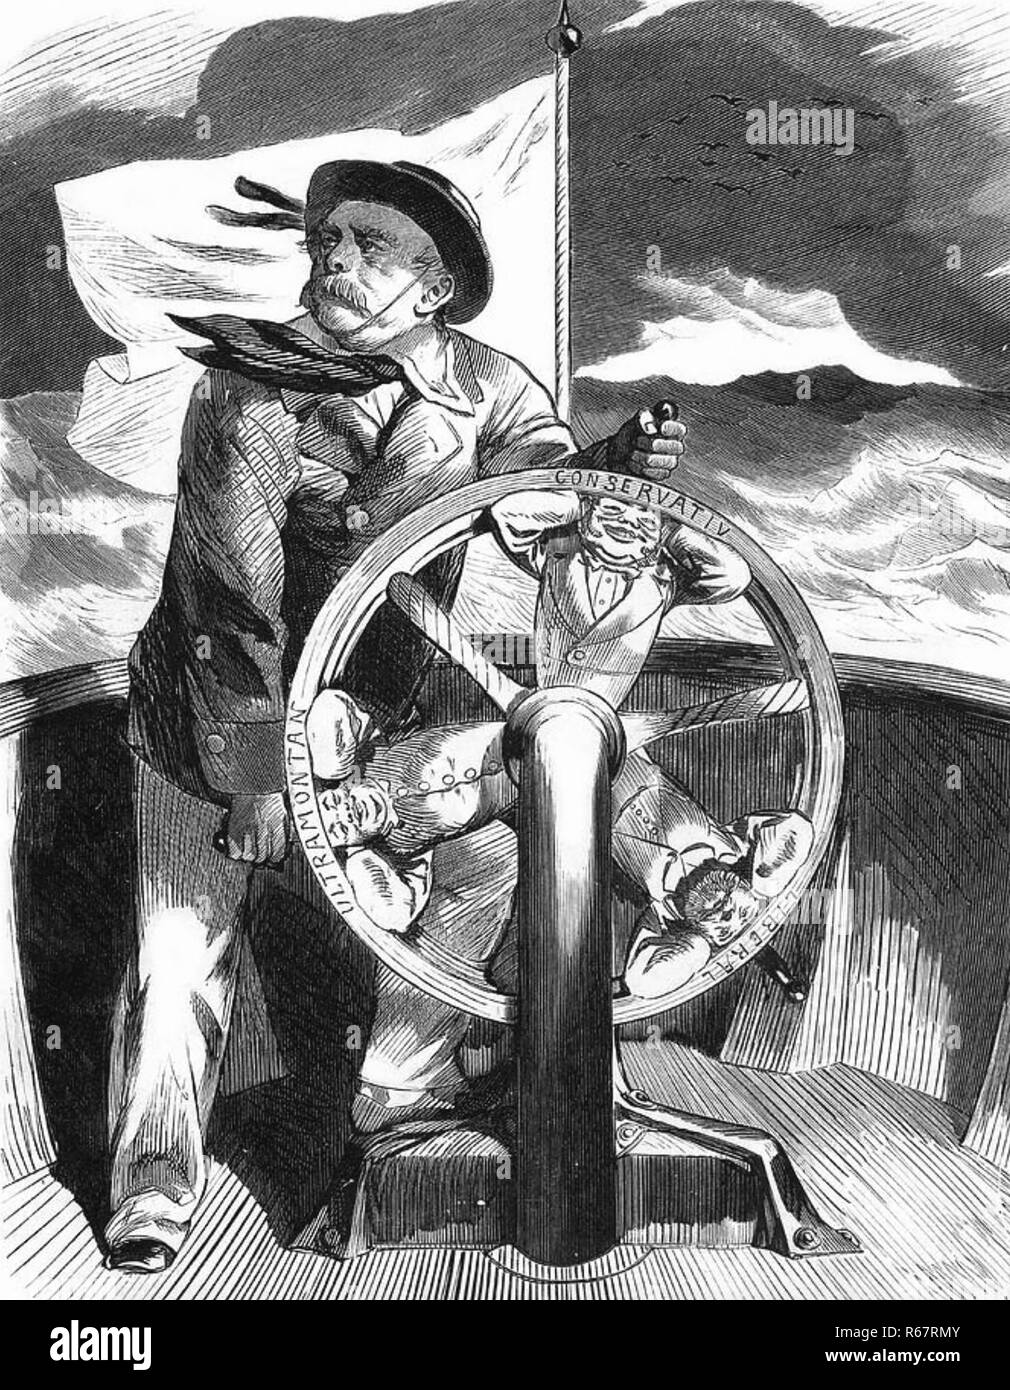 OTTO von BISMARCK (1815-1898) Prussian statesman in an 1879 cartoon driving the ship of state between the forces of conservatism and radicalism. Stock Photo